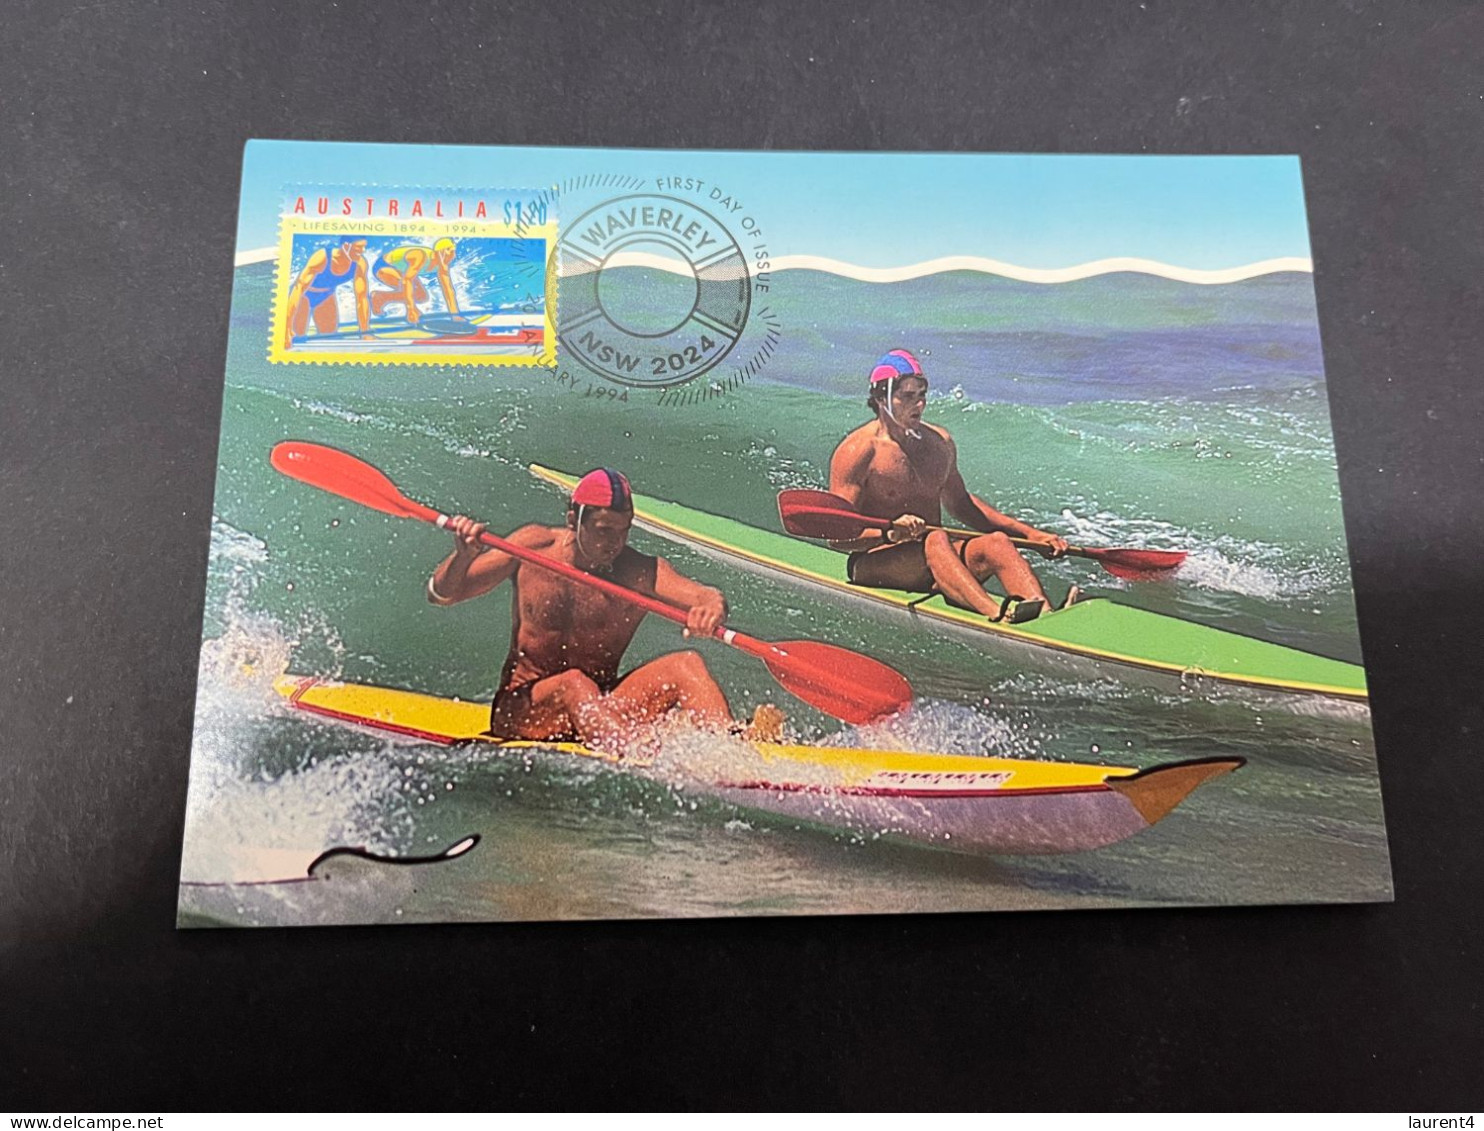 18-4-2024 (2 Z 25 A) Australia Maxicard (4 Surf Life-savers) If No Bid - This Items Will NOT Be Re-listed For Sale - Maximum Cards